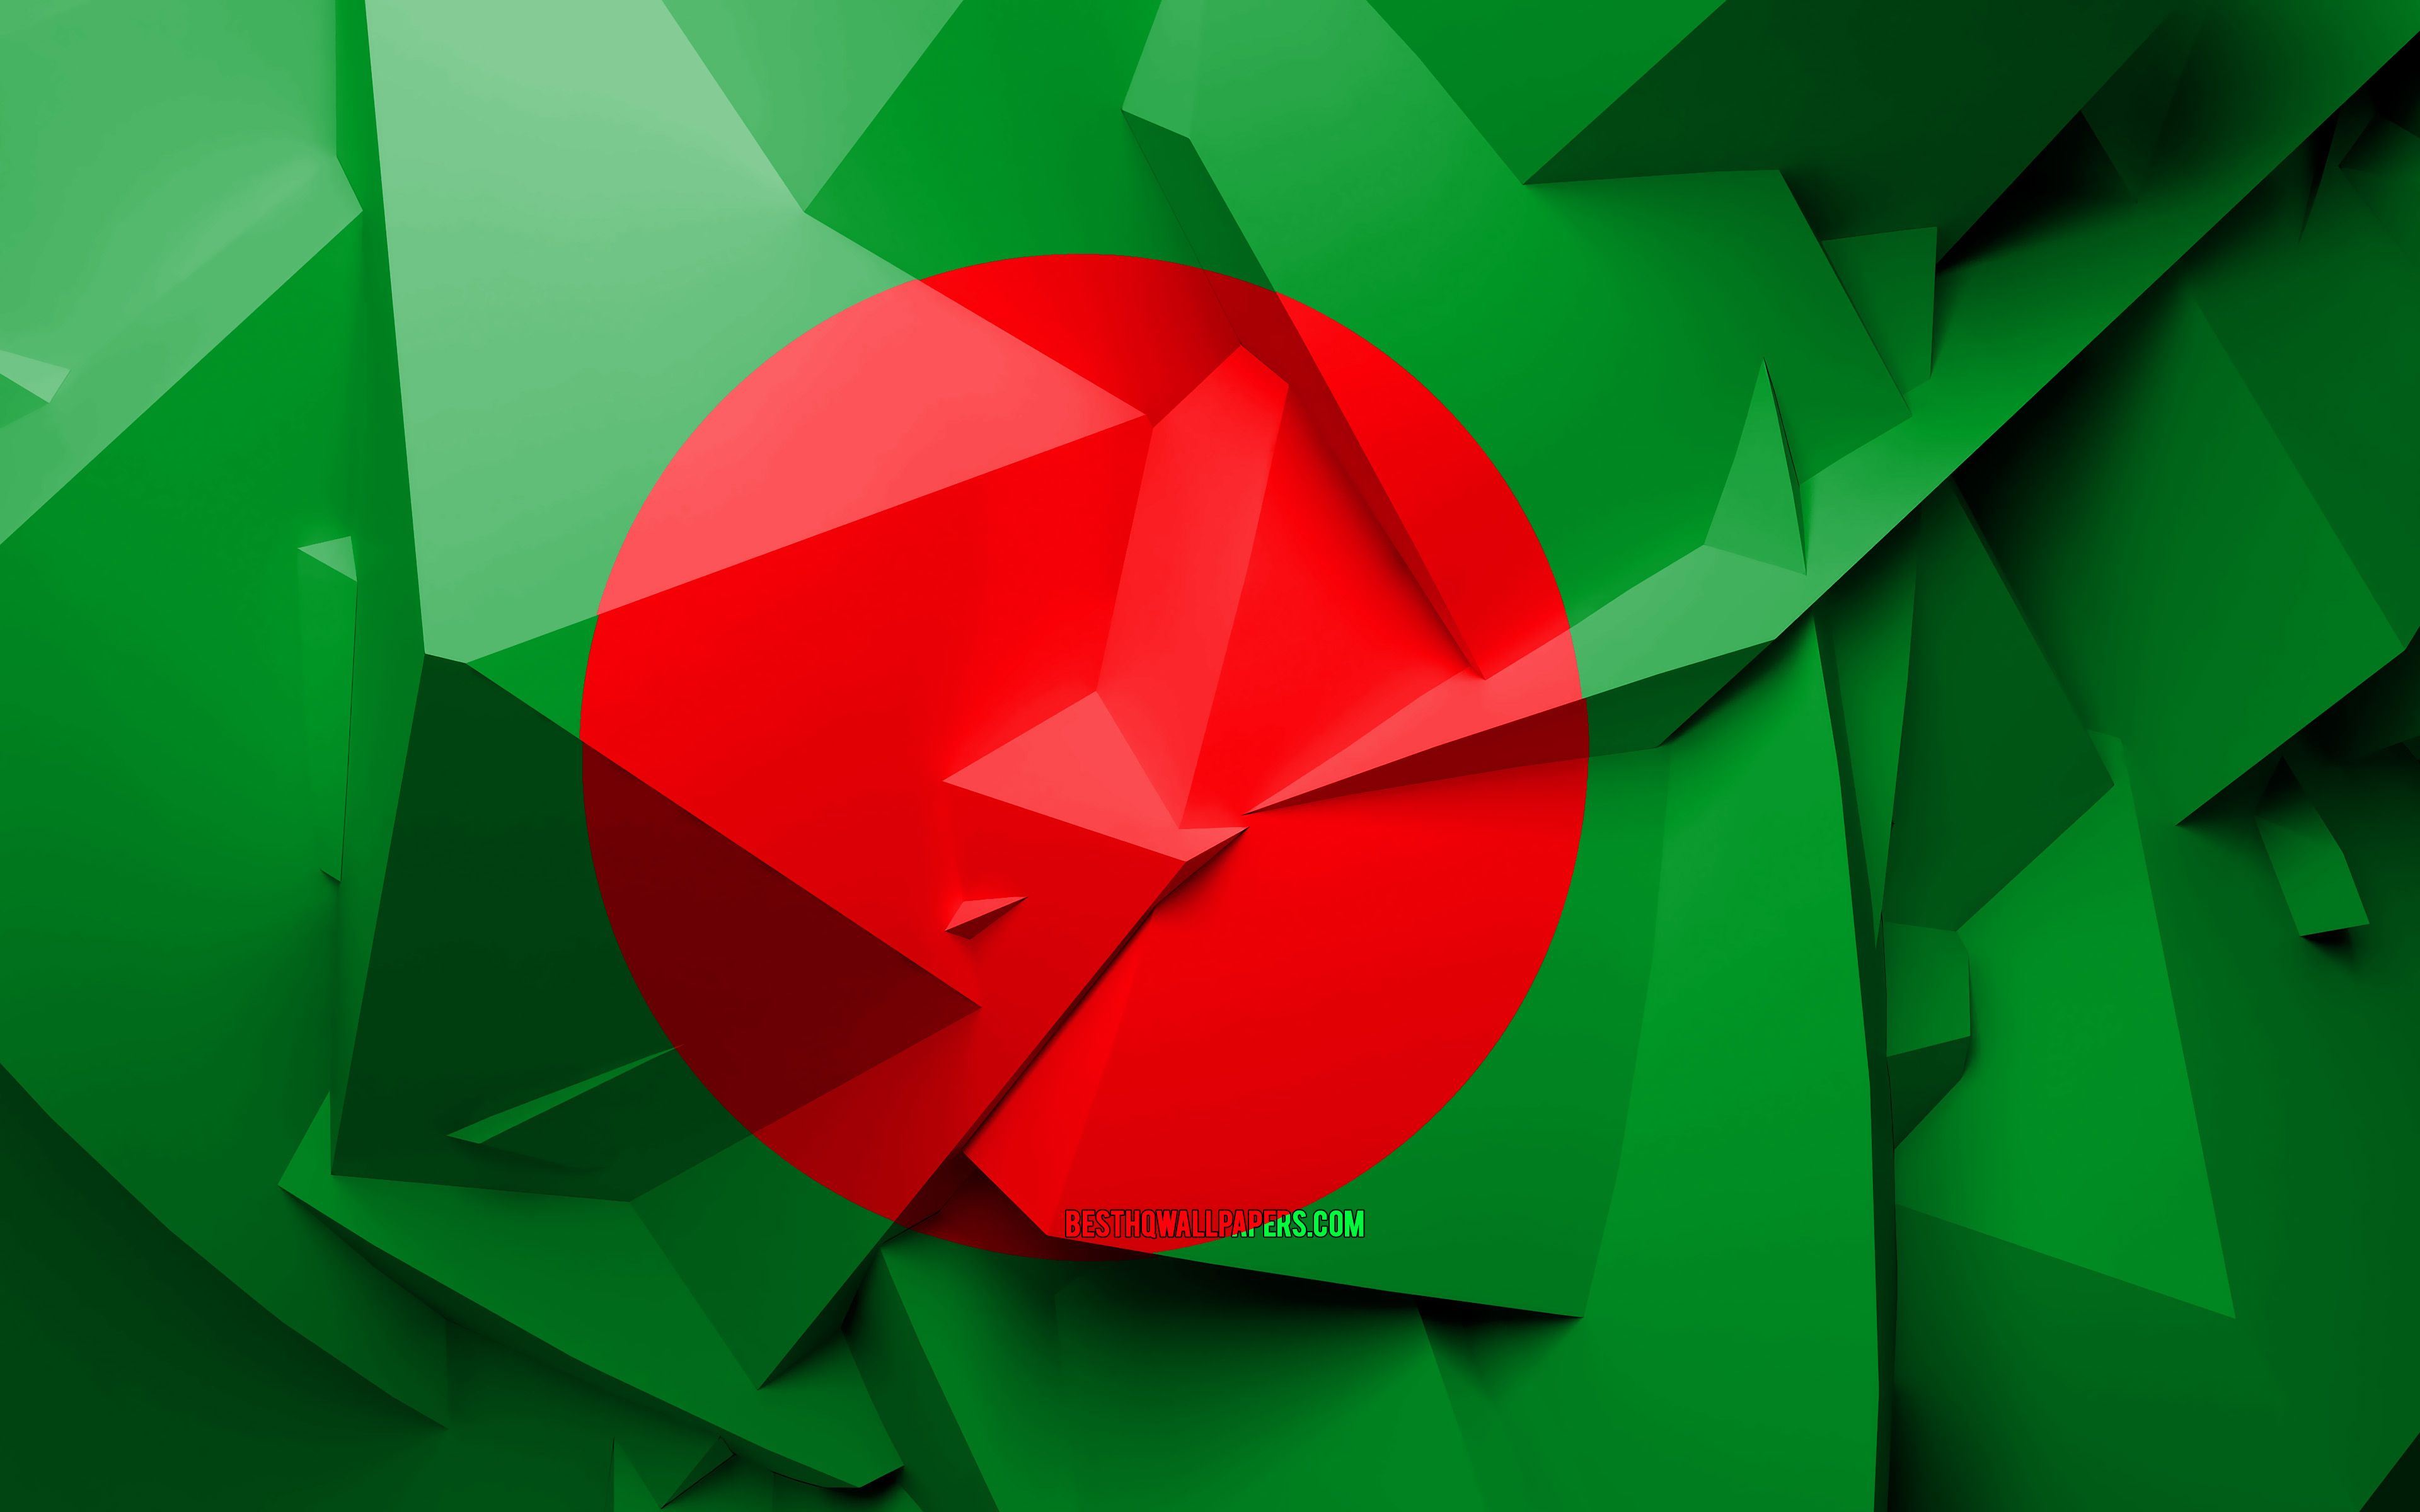 Download wallpaper 4k, Flag of Bangladesh, geometric art, Asian countries, Bangladesh flag, creative, Bangladesh, Asia, Bangladesh 3D flag, national symbols for desktop with resolution 3840x2400. High Quality HD picture wallpaper